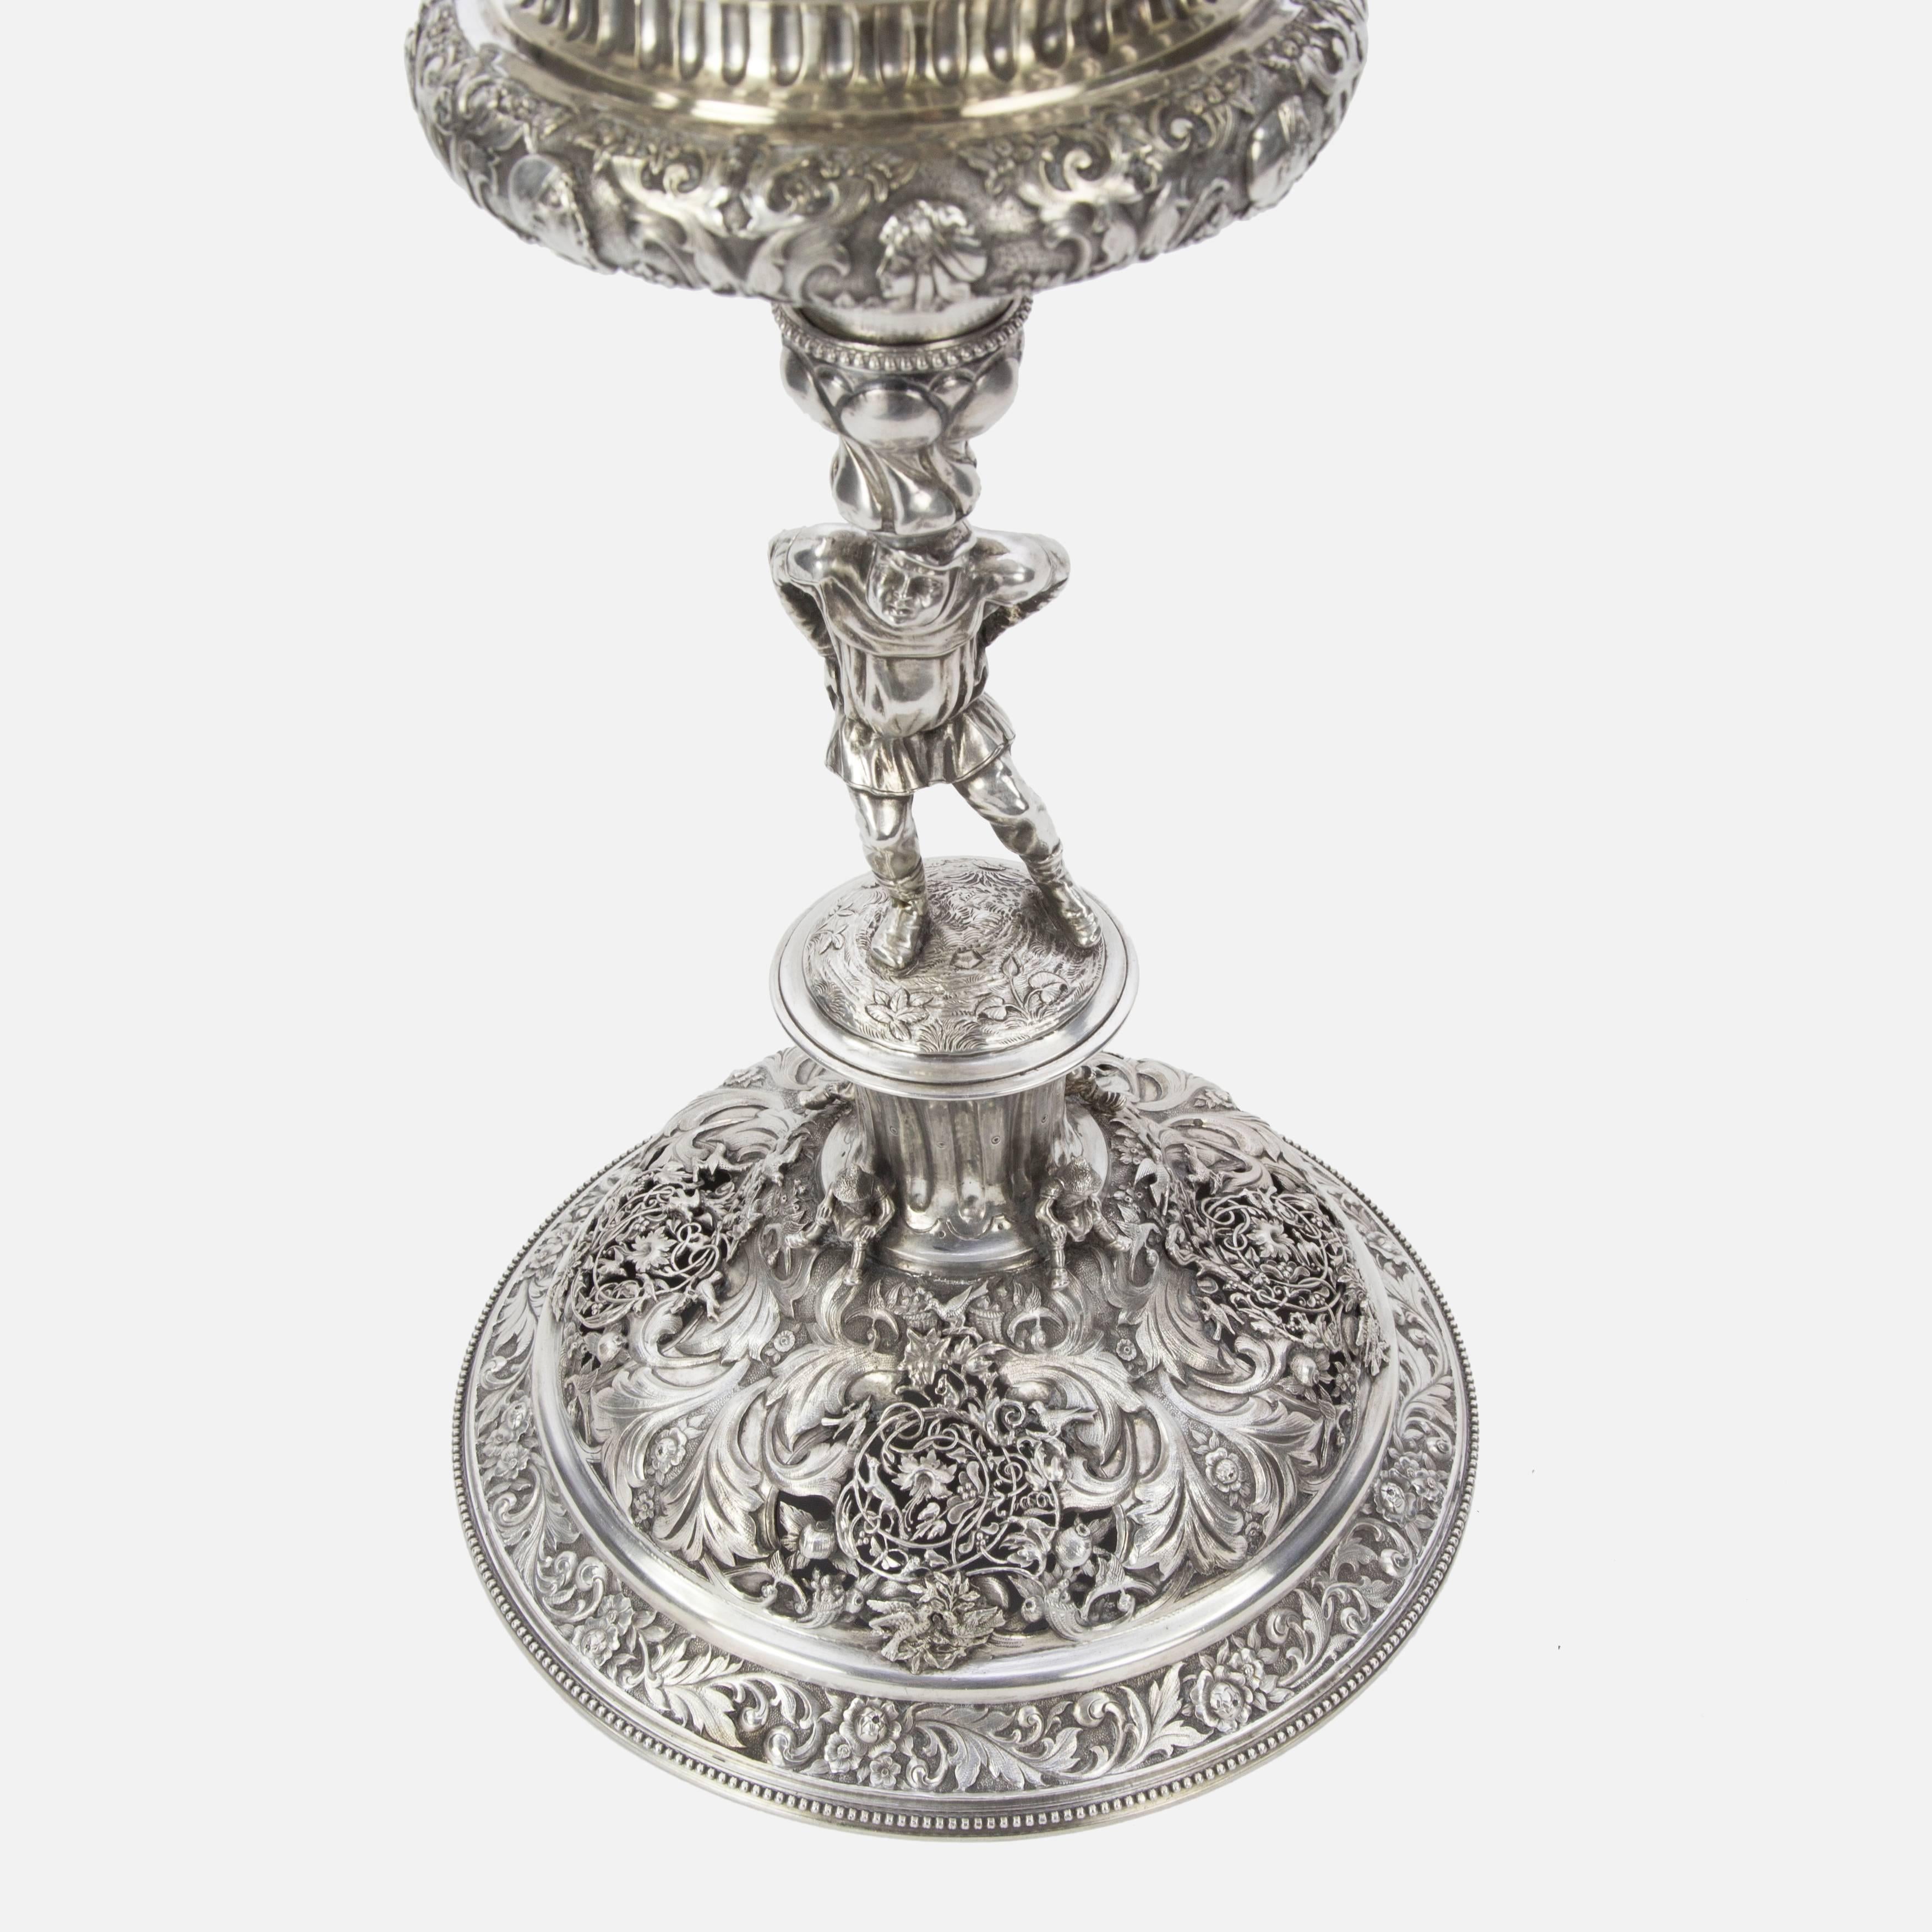 Sensational large silver Chalice with cover beautifully handcrafted entirely in silver (800 silver standard); decorated with motifs in relief, pierced, engraved and chased designs. It is inspired directly in similar pieces influenced by Medieval